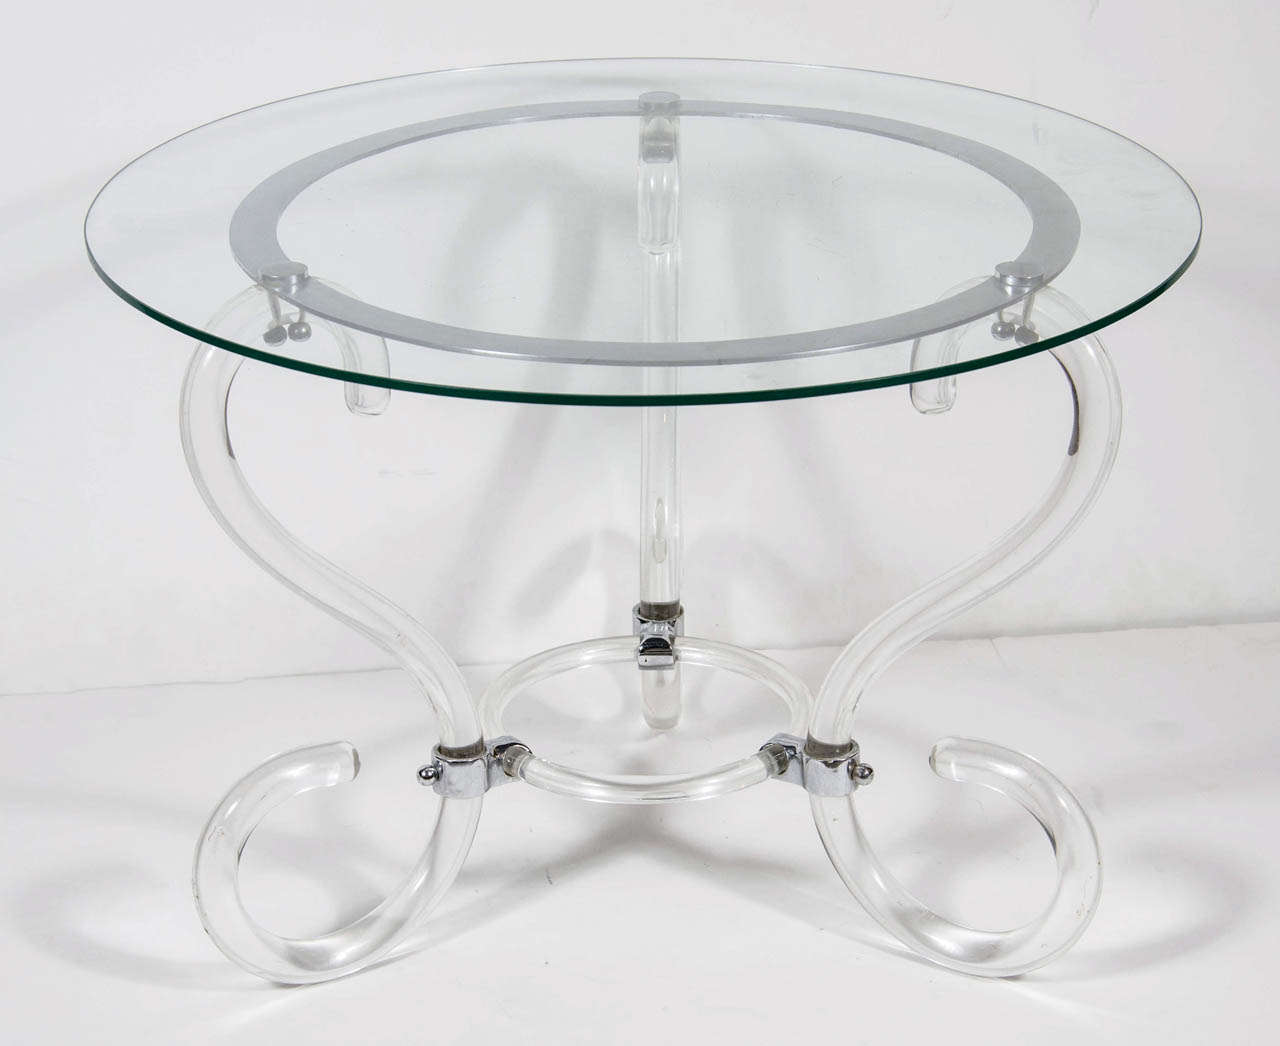 This special table features a three leg scroll form design with chromed supports and a round glass top.